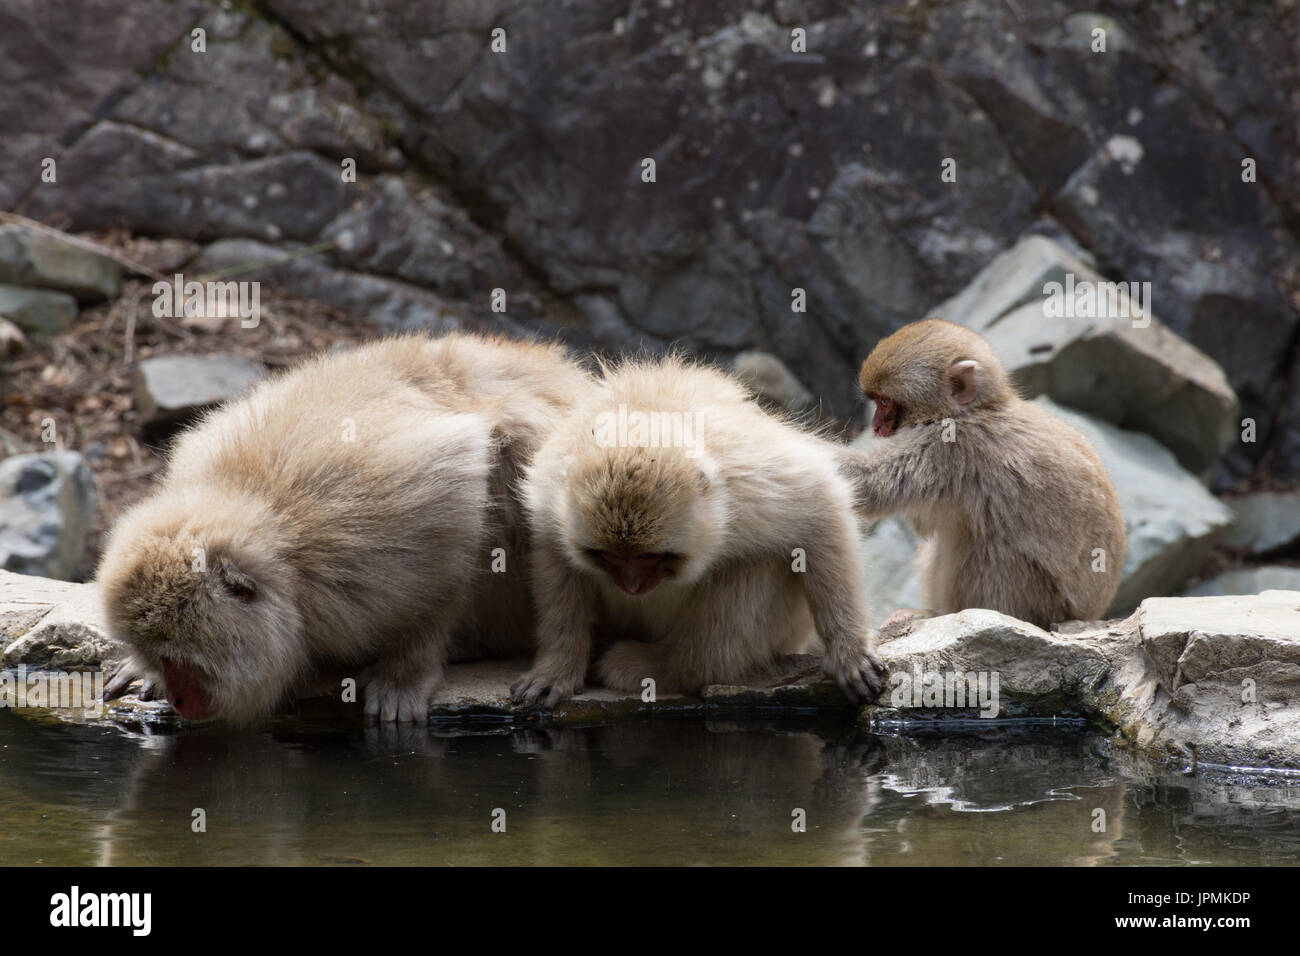 Two adult snow monkeys drinking water from a hot spring pool with the baby monkey grooming the adult. Stock Photo